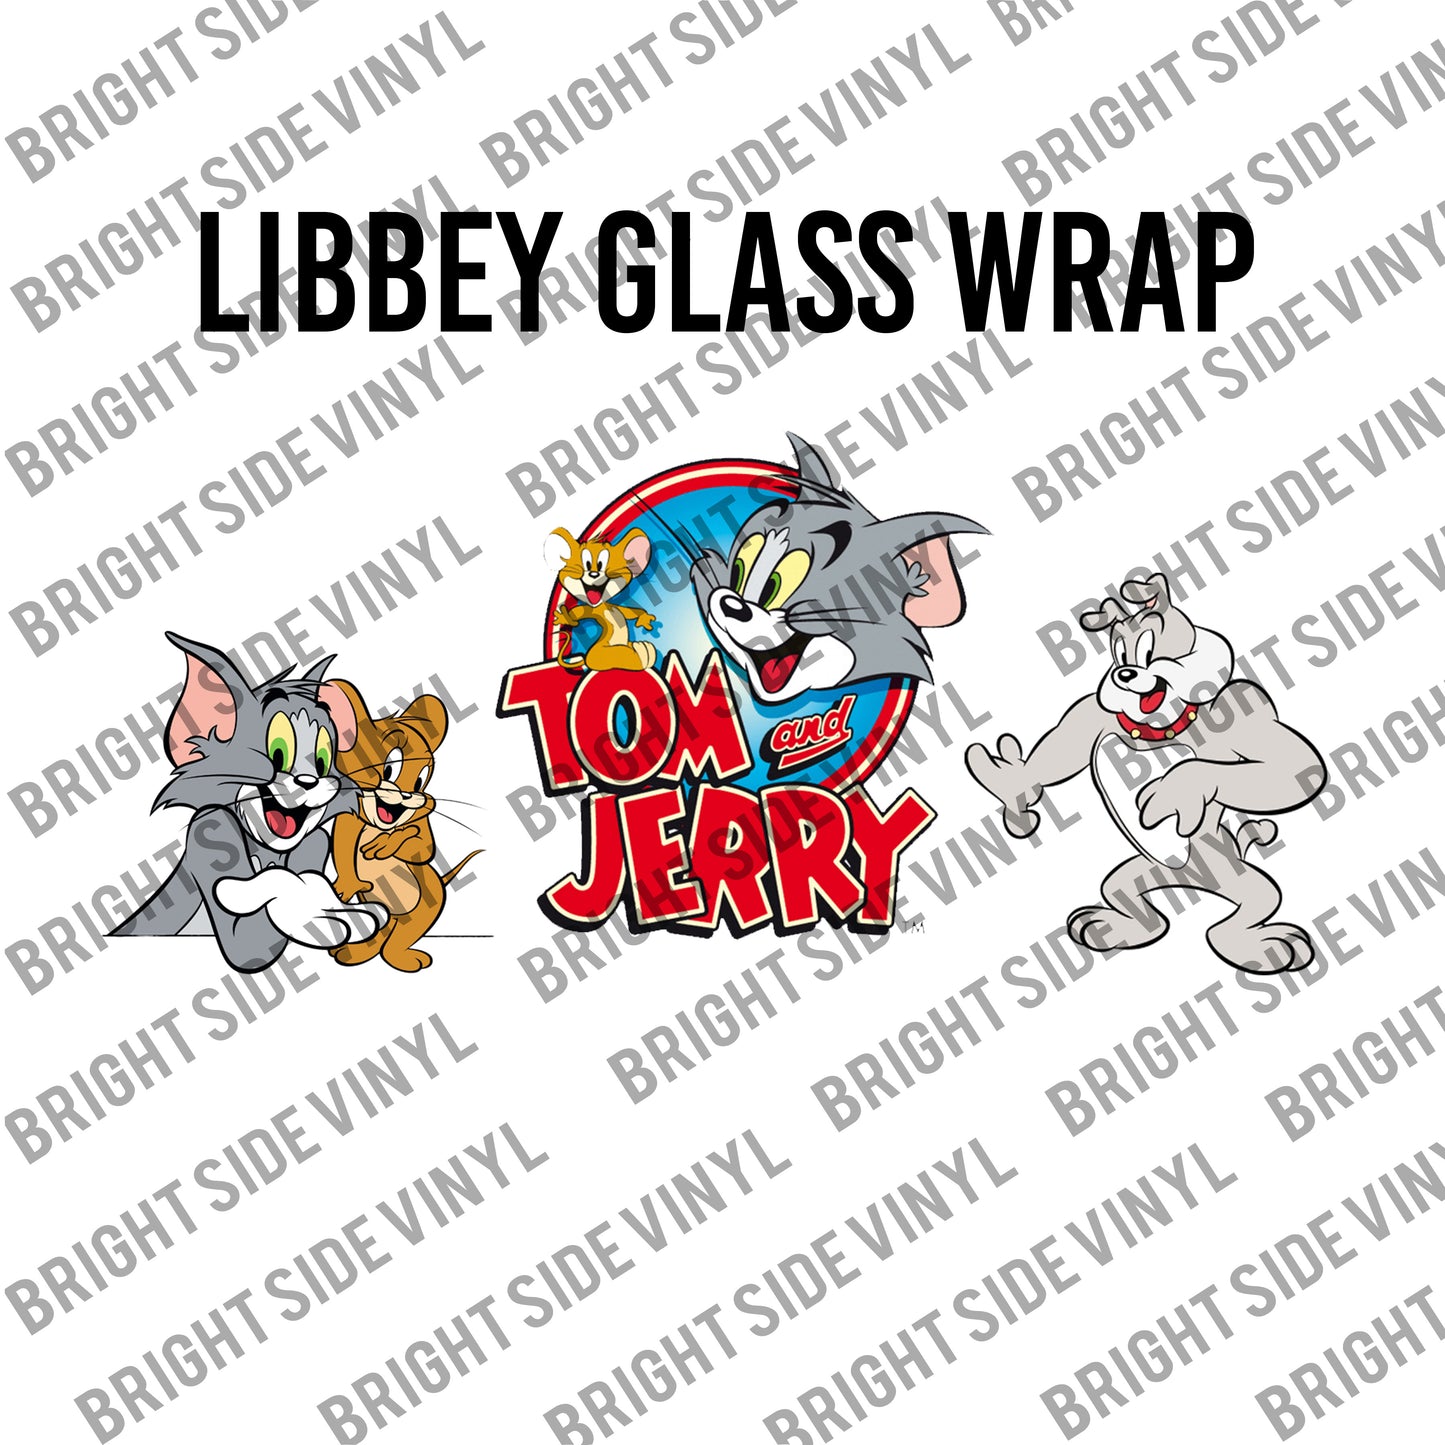 Tom and Jerry (Libbey Glass Wrap)